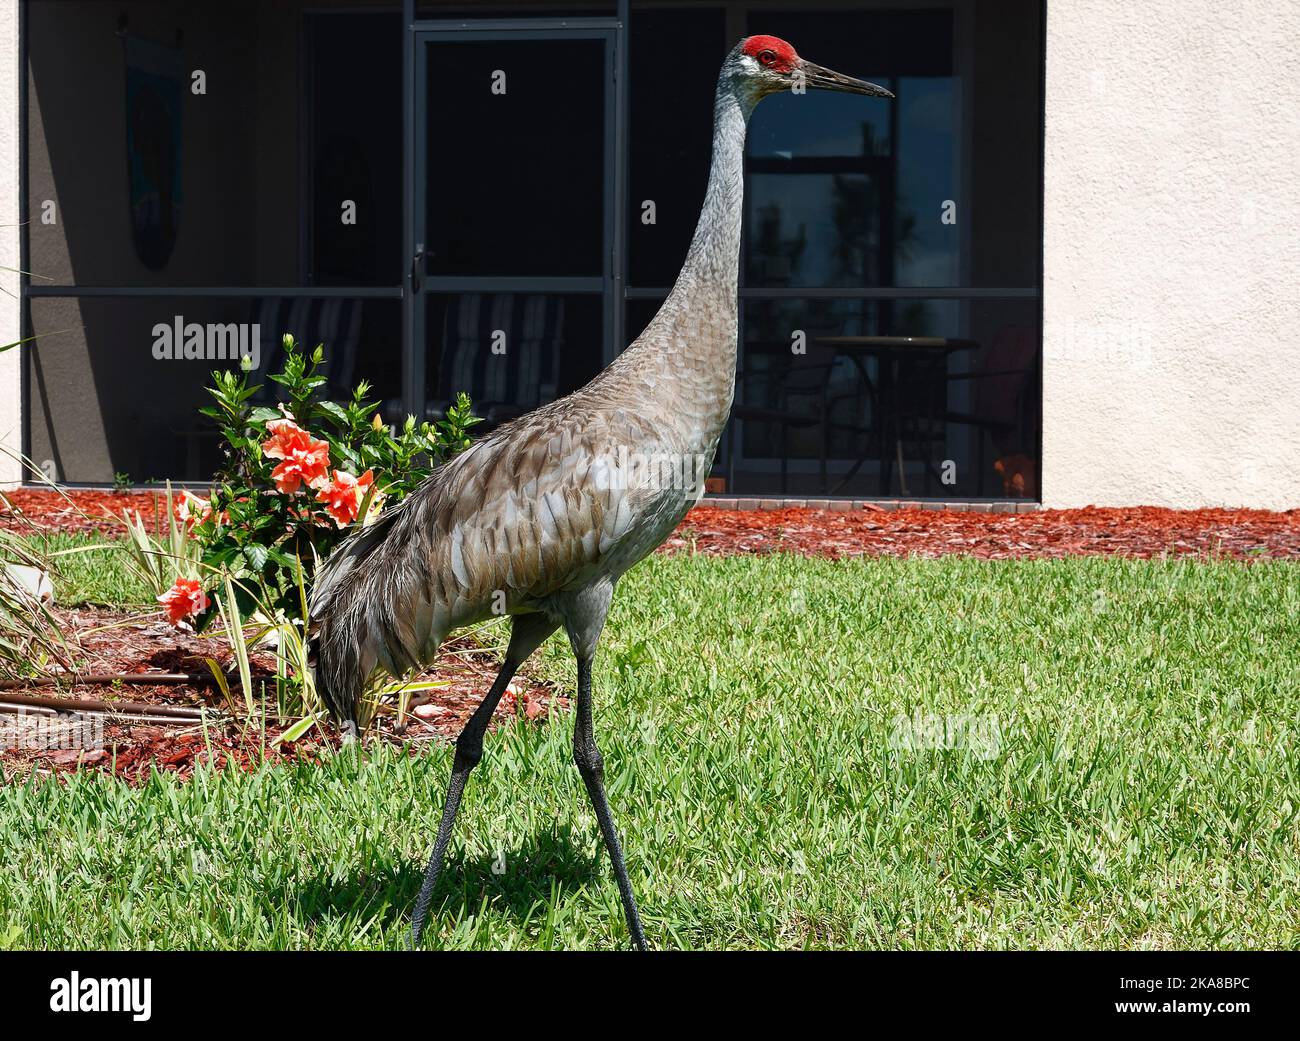 Sandhill Crane, walking through grass, by house, backyard, very large bird, Grus canadensis, red forehead, tufted rump feathers, long neck, long legs, Stock Photo